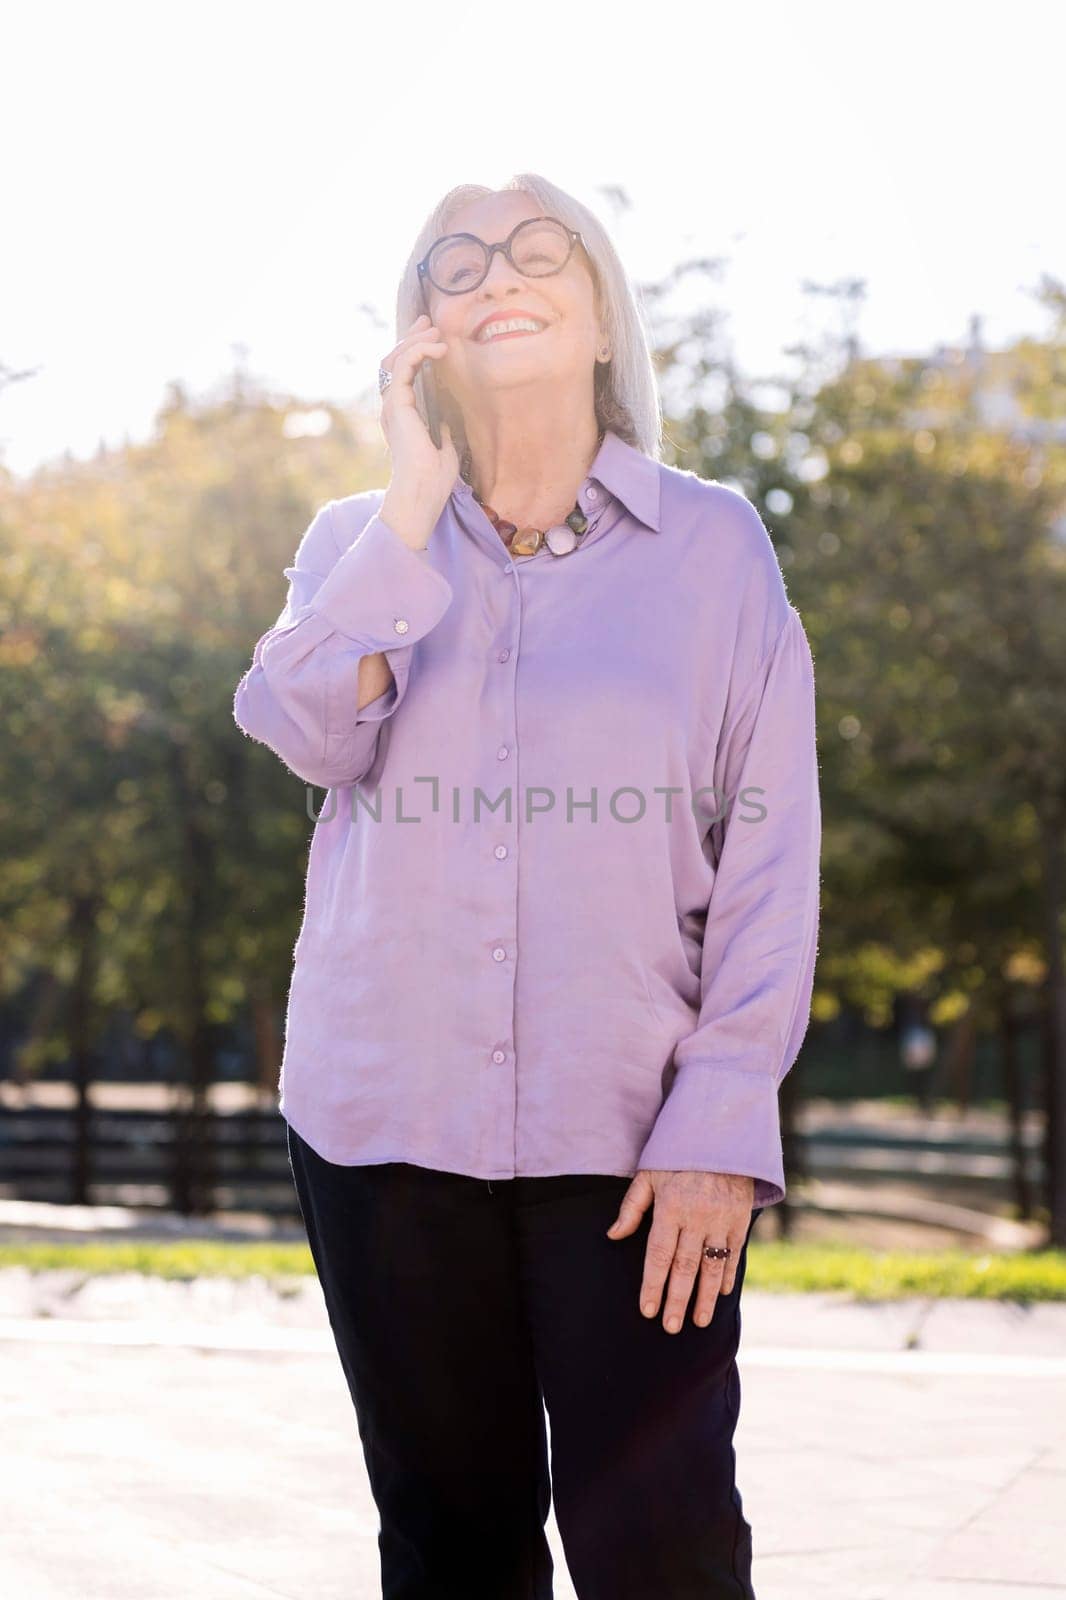 senior woman smiling happy talking by mobile phone outdoors, concept of technology and elderly people leisure